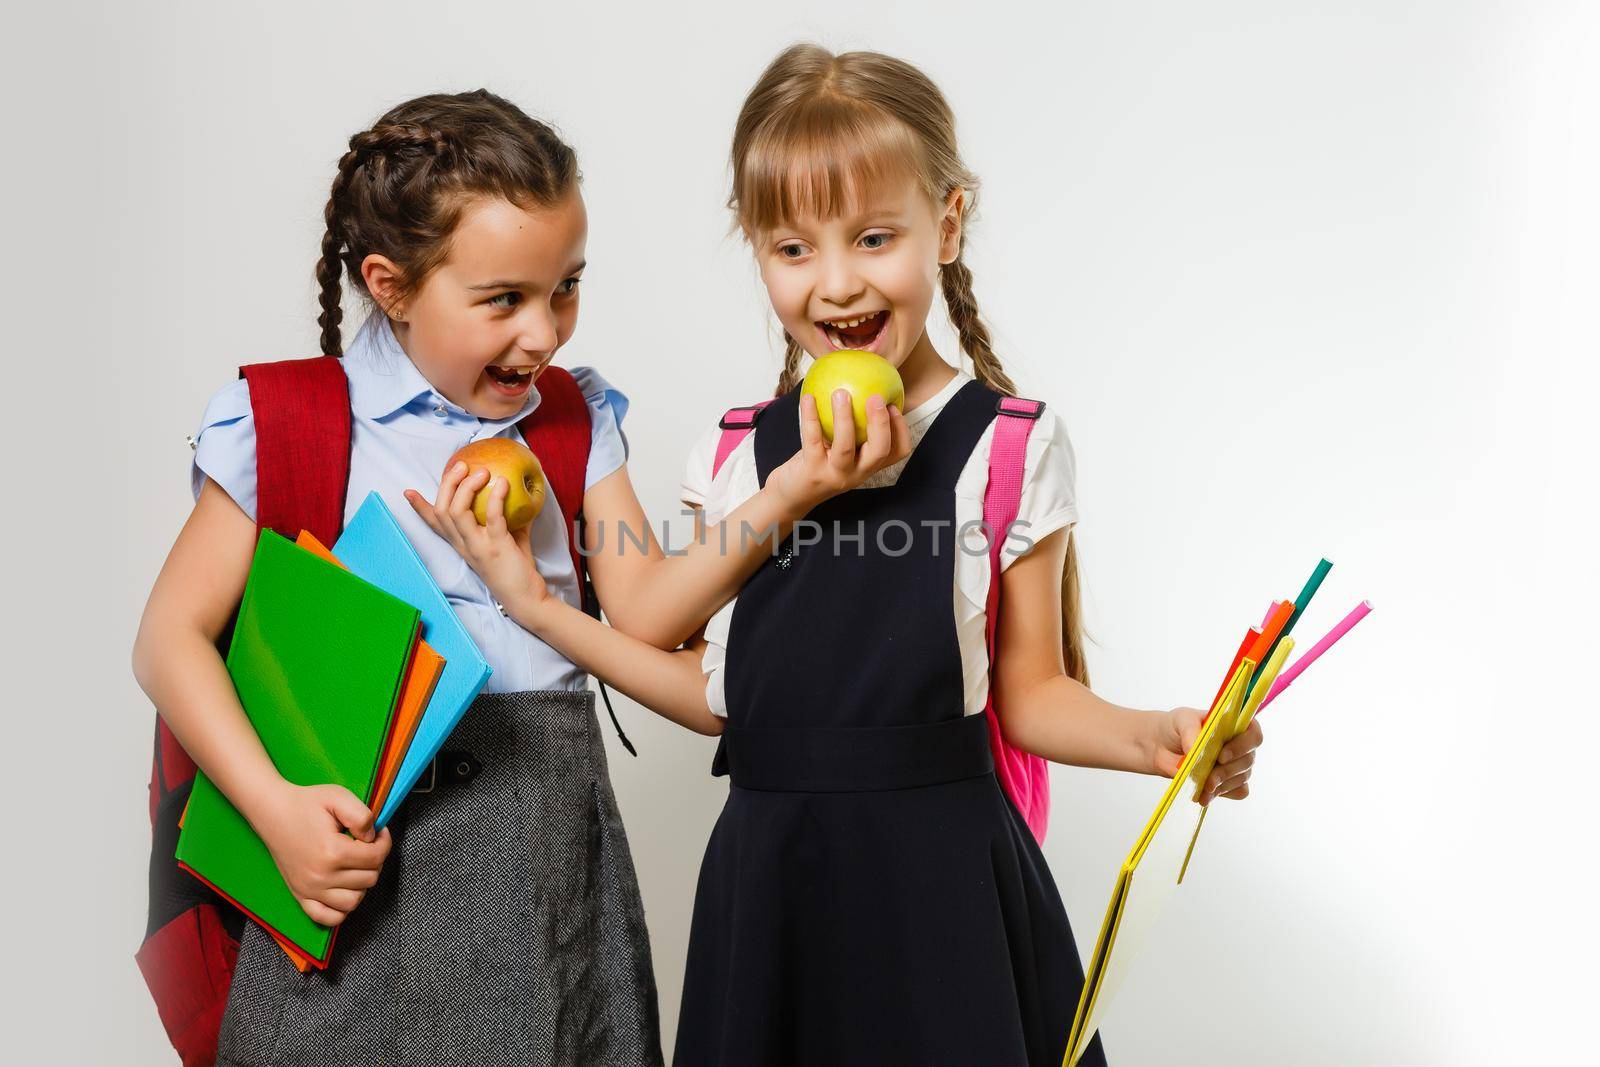 Portrait of two people nice cute lovely charming dreamy attractive cheerful pre-teen girls siblings showing aside ad promotion copy space isolated background